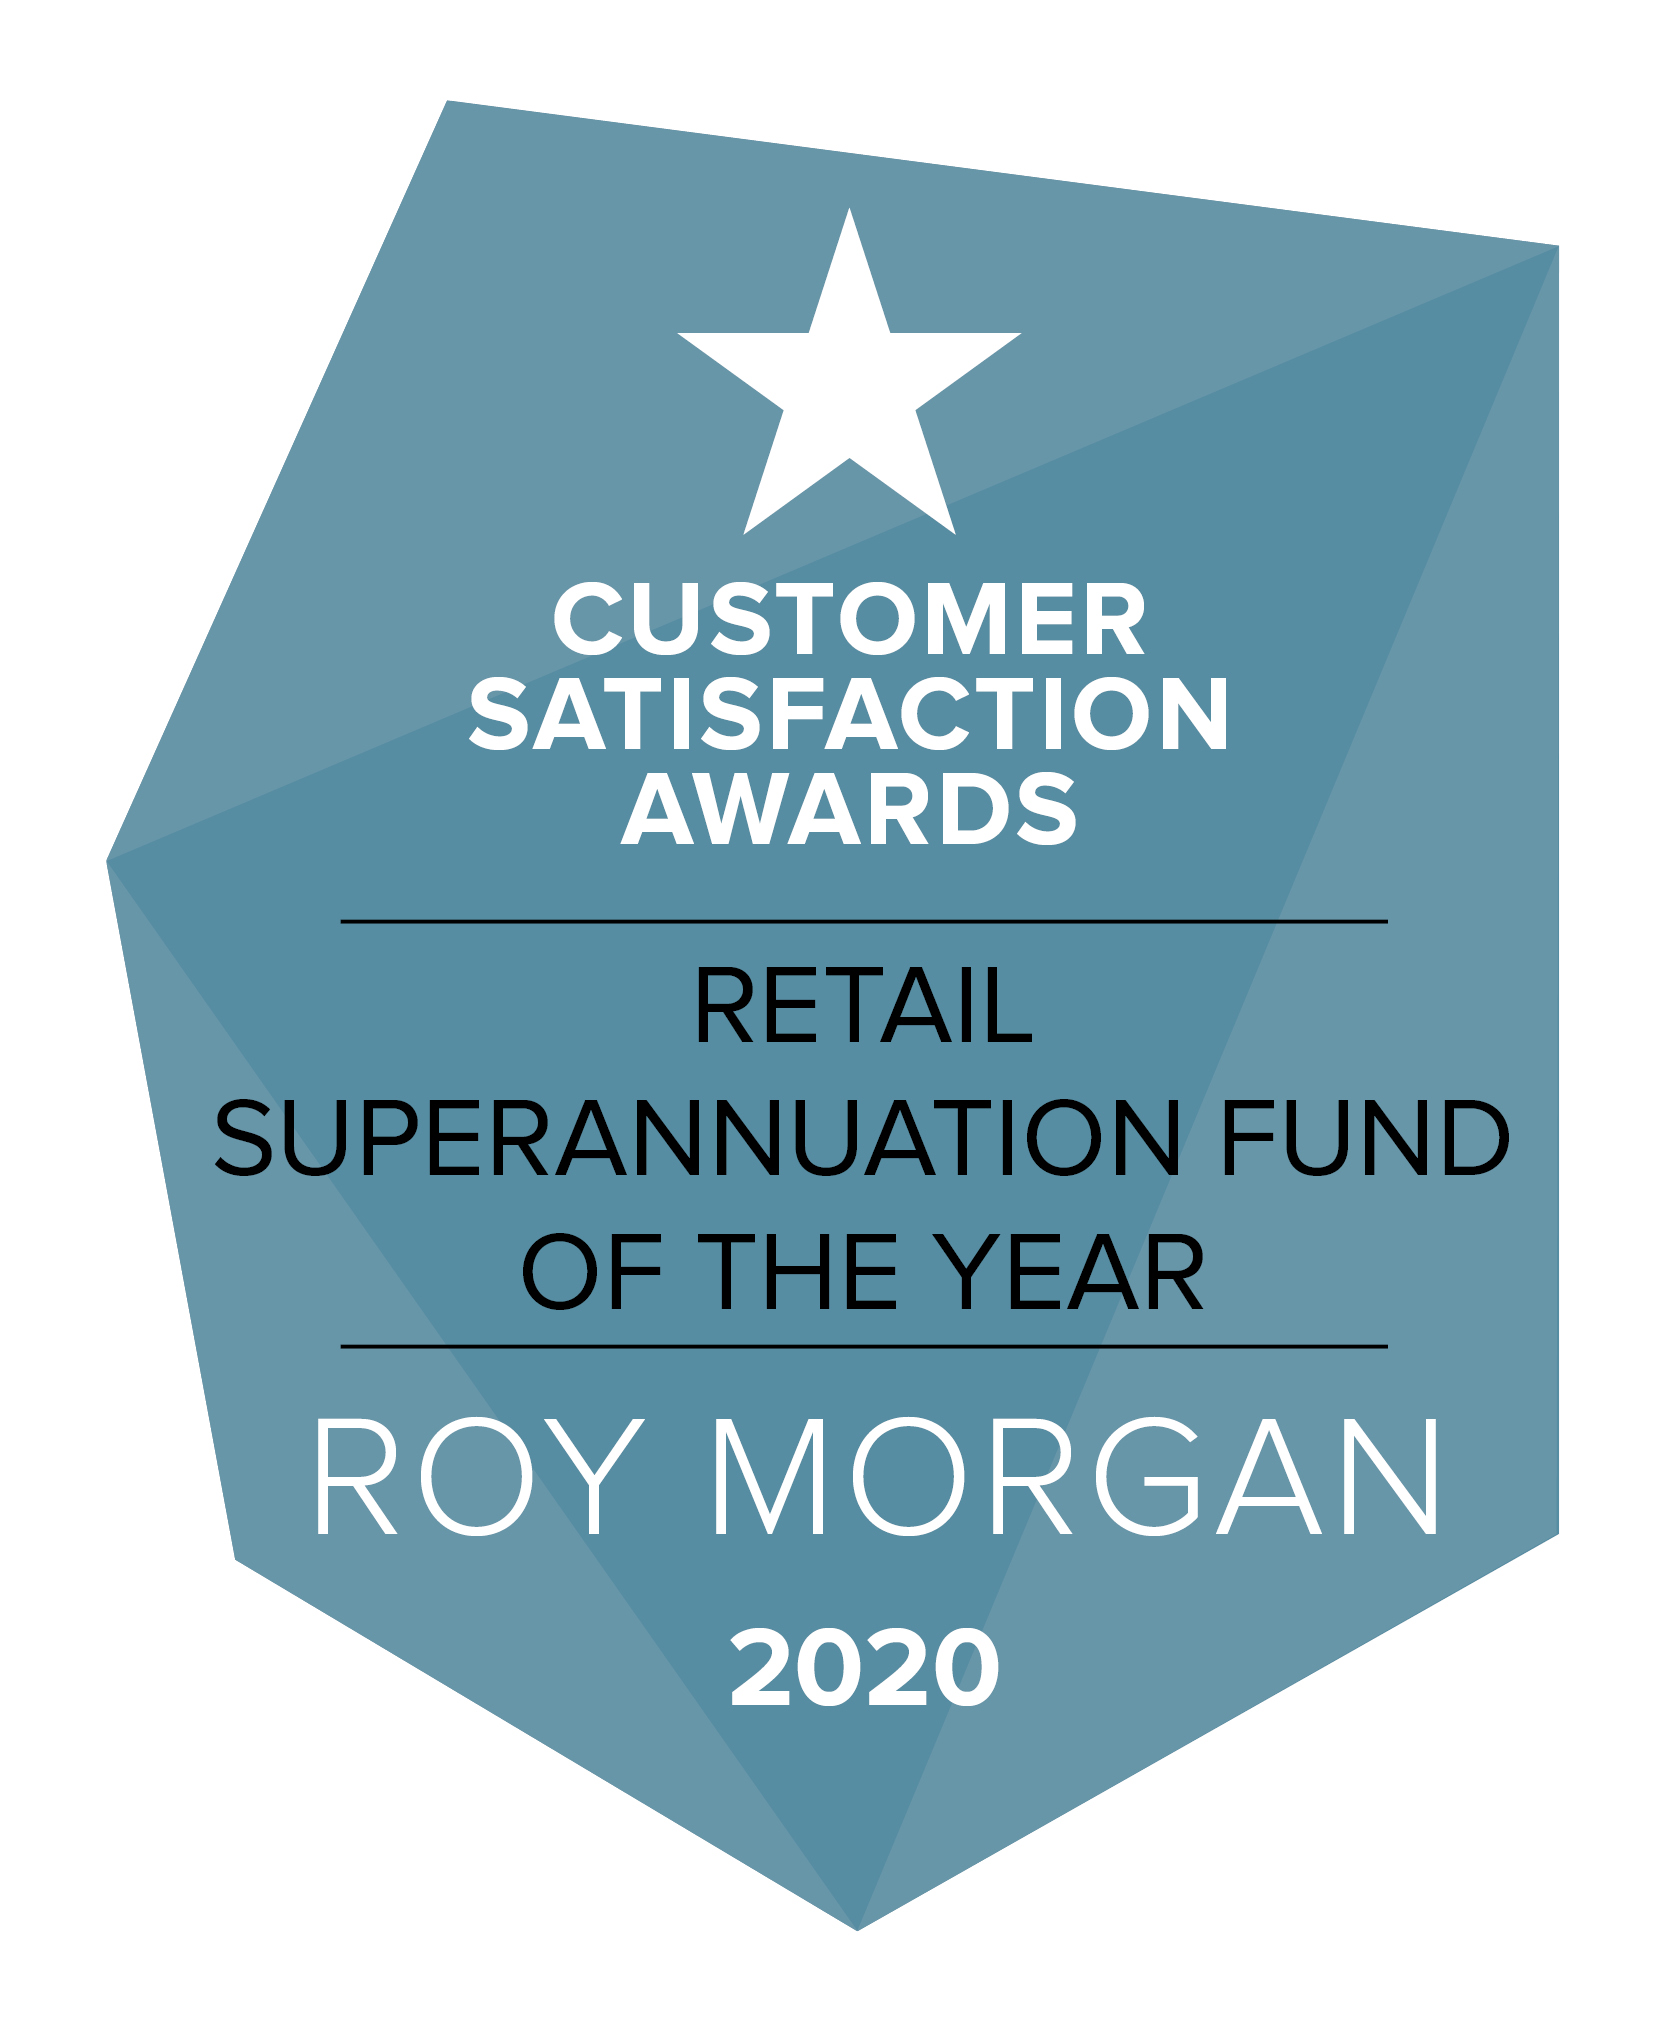 Roy Morgan Retail Superannuation Fund of the Year 2020